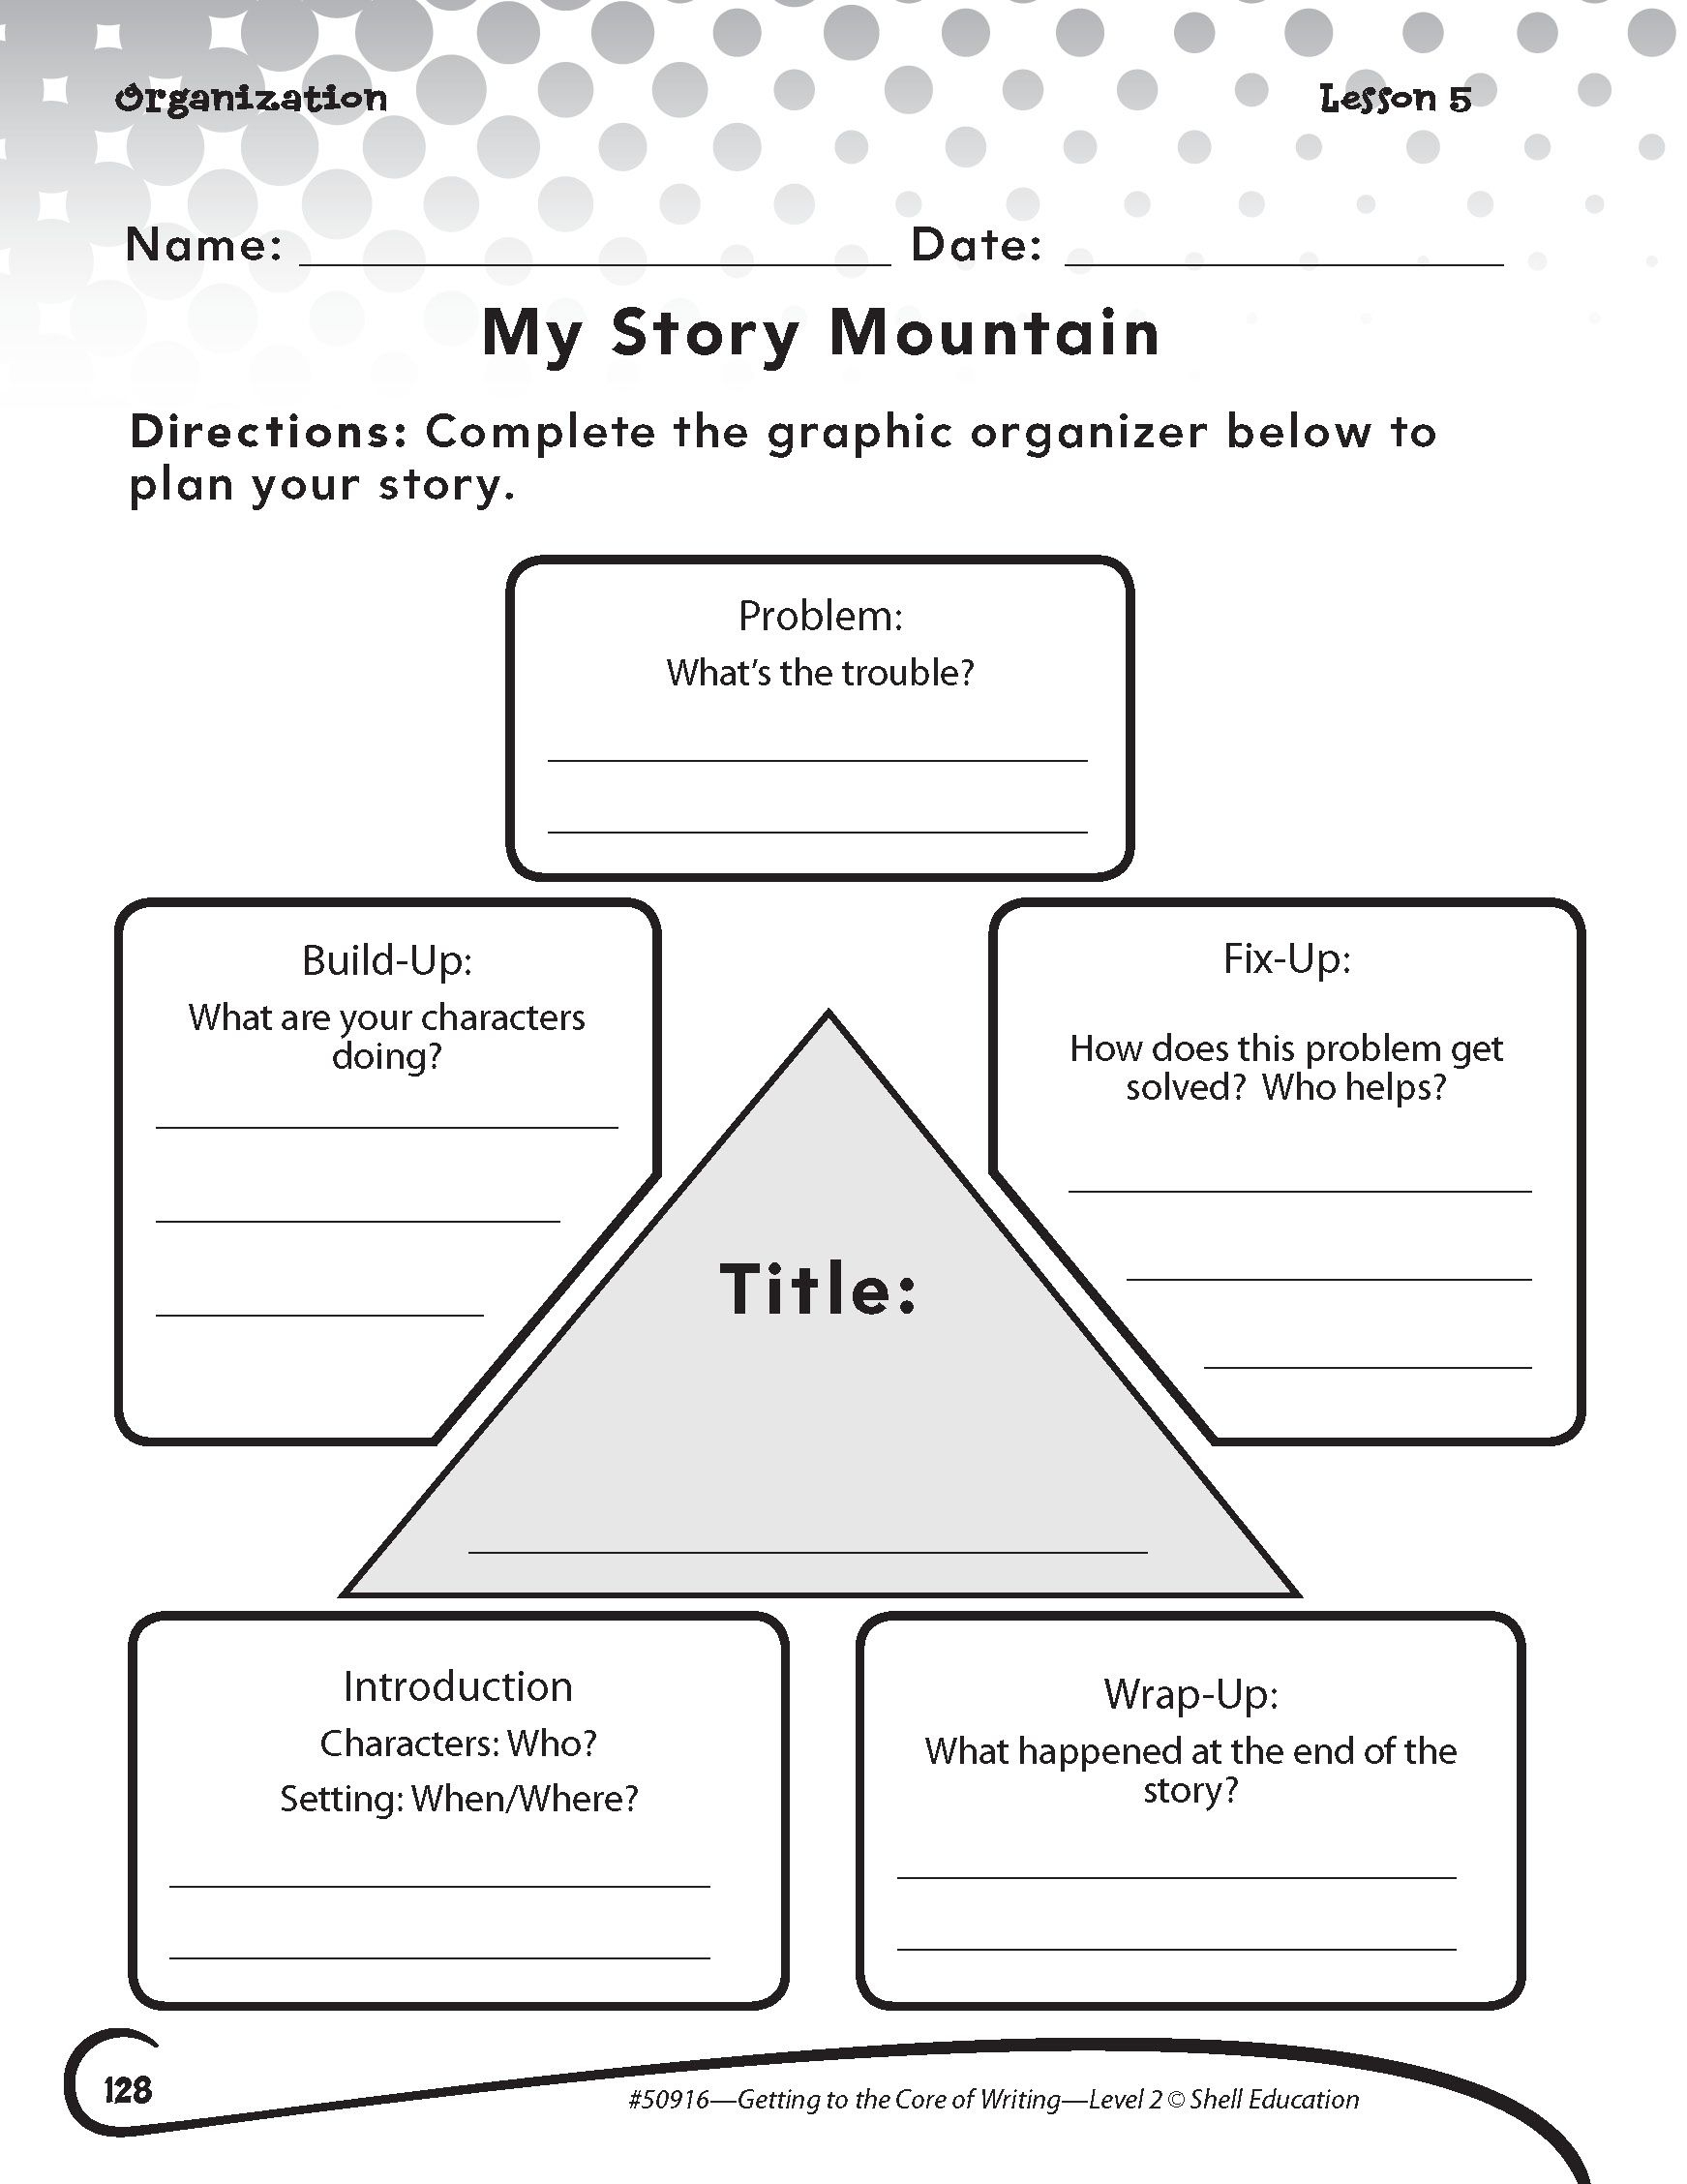 My Story Mountain&amp;quot; Activity From Getting To The Core Of